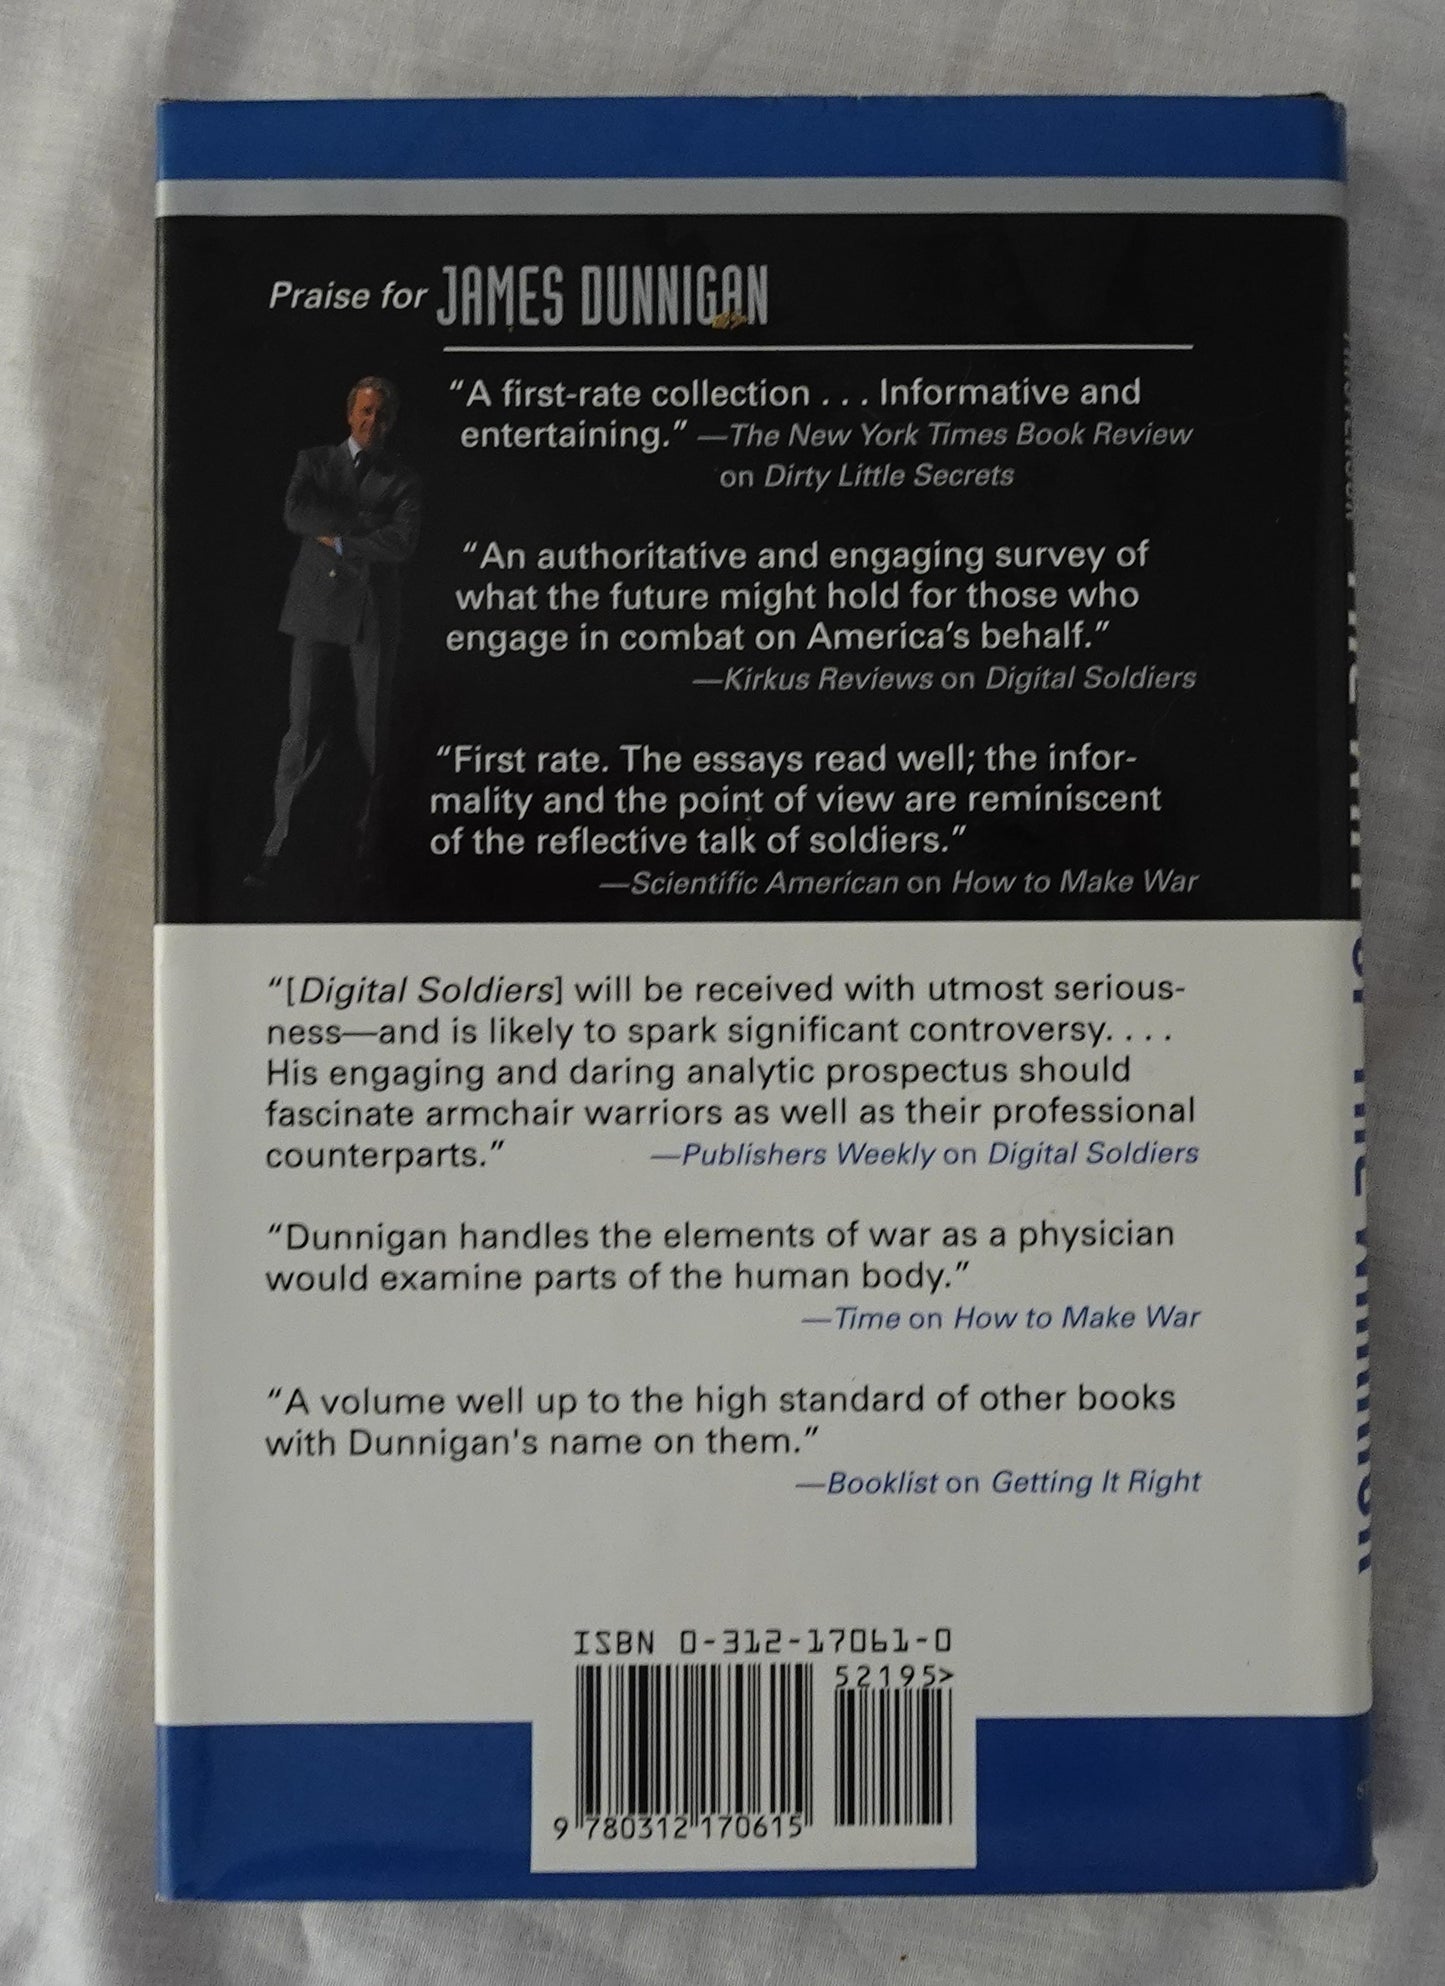 The Way of the Warrior by James Dunnigan and Daniel Masterson